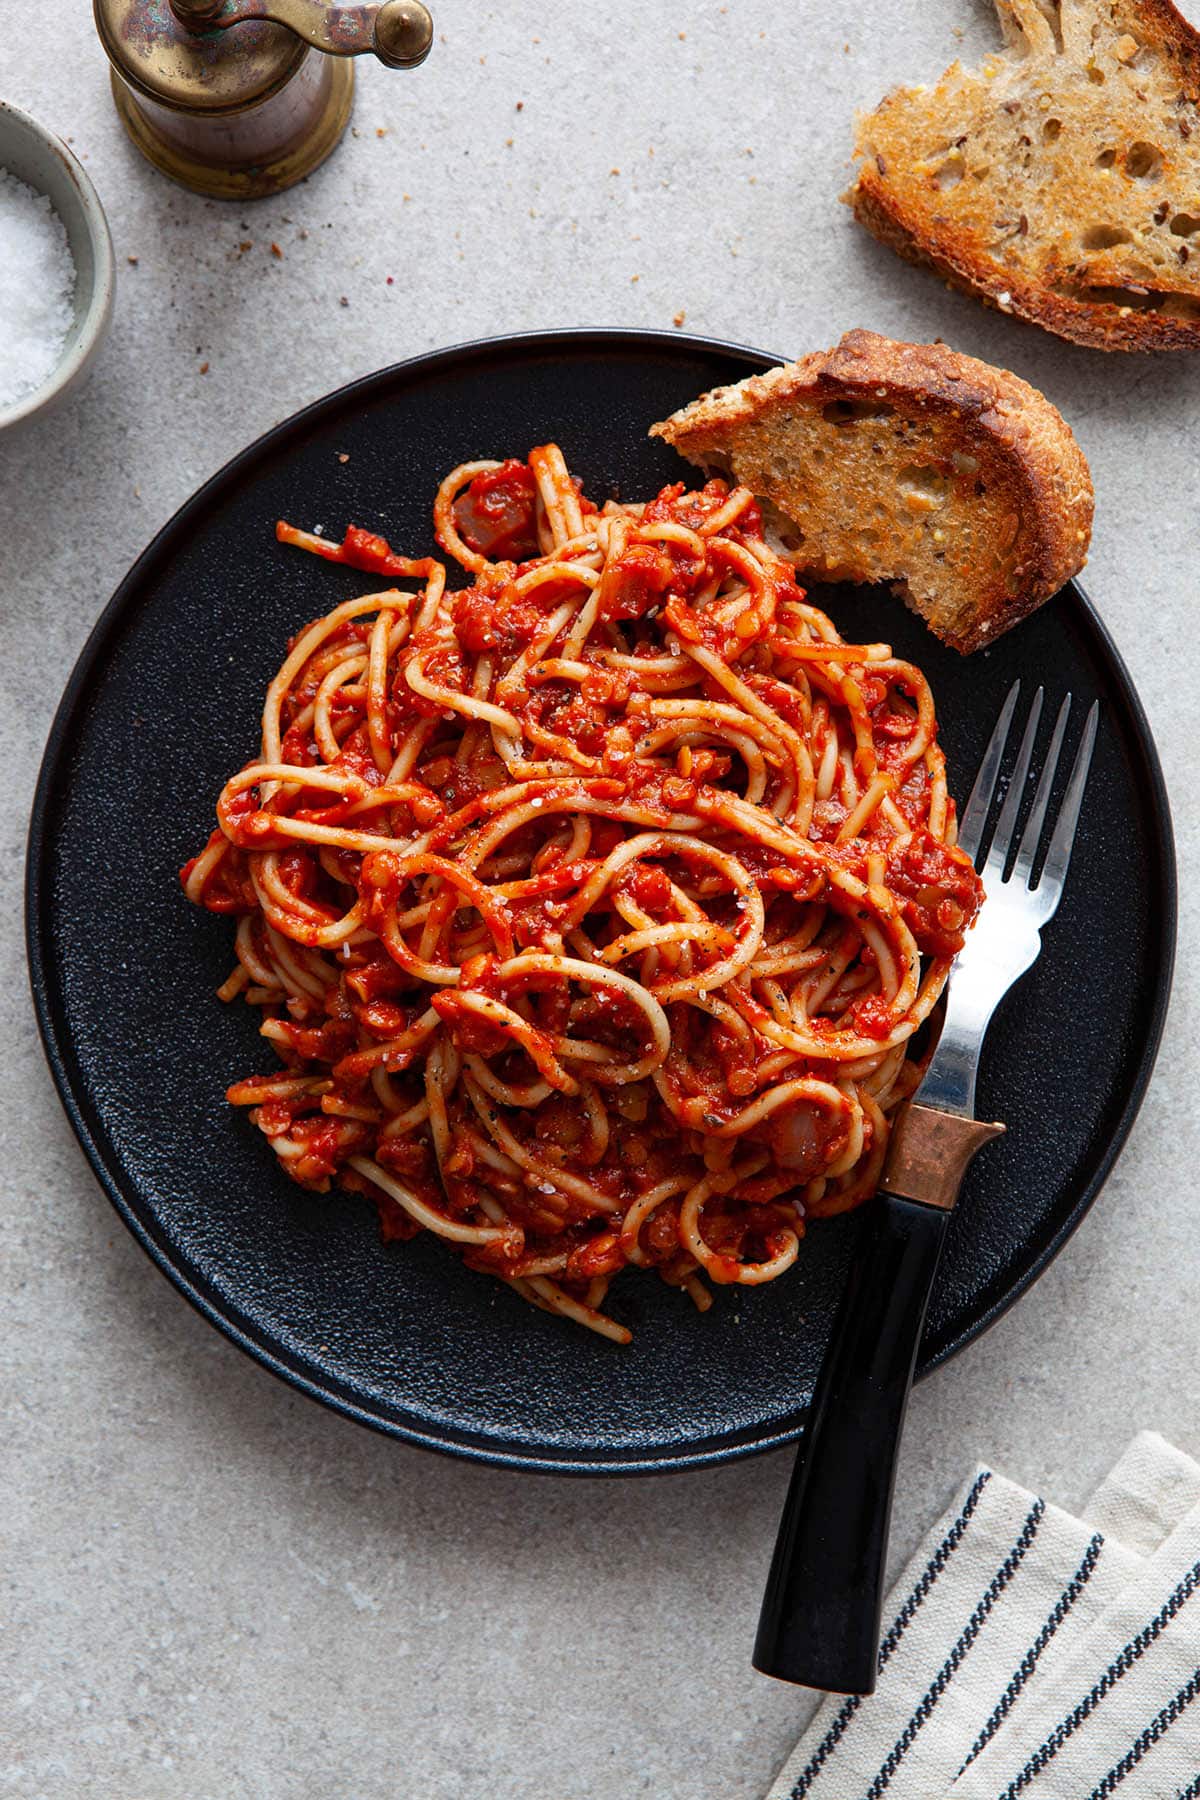 A plate of spaghetti tossed with lentil Bolognese sauce on a black plate with a black fork and a piece of toasted bread on the plate.